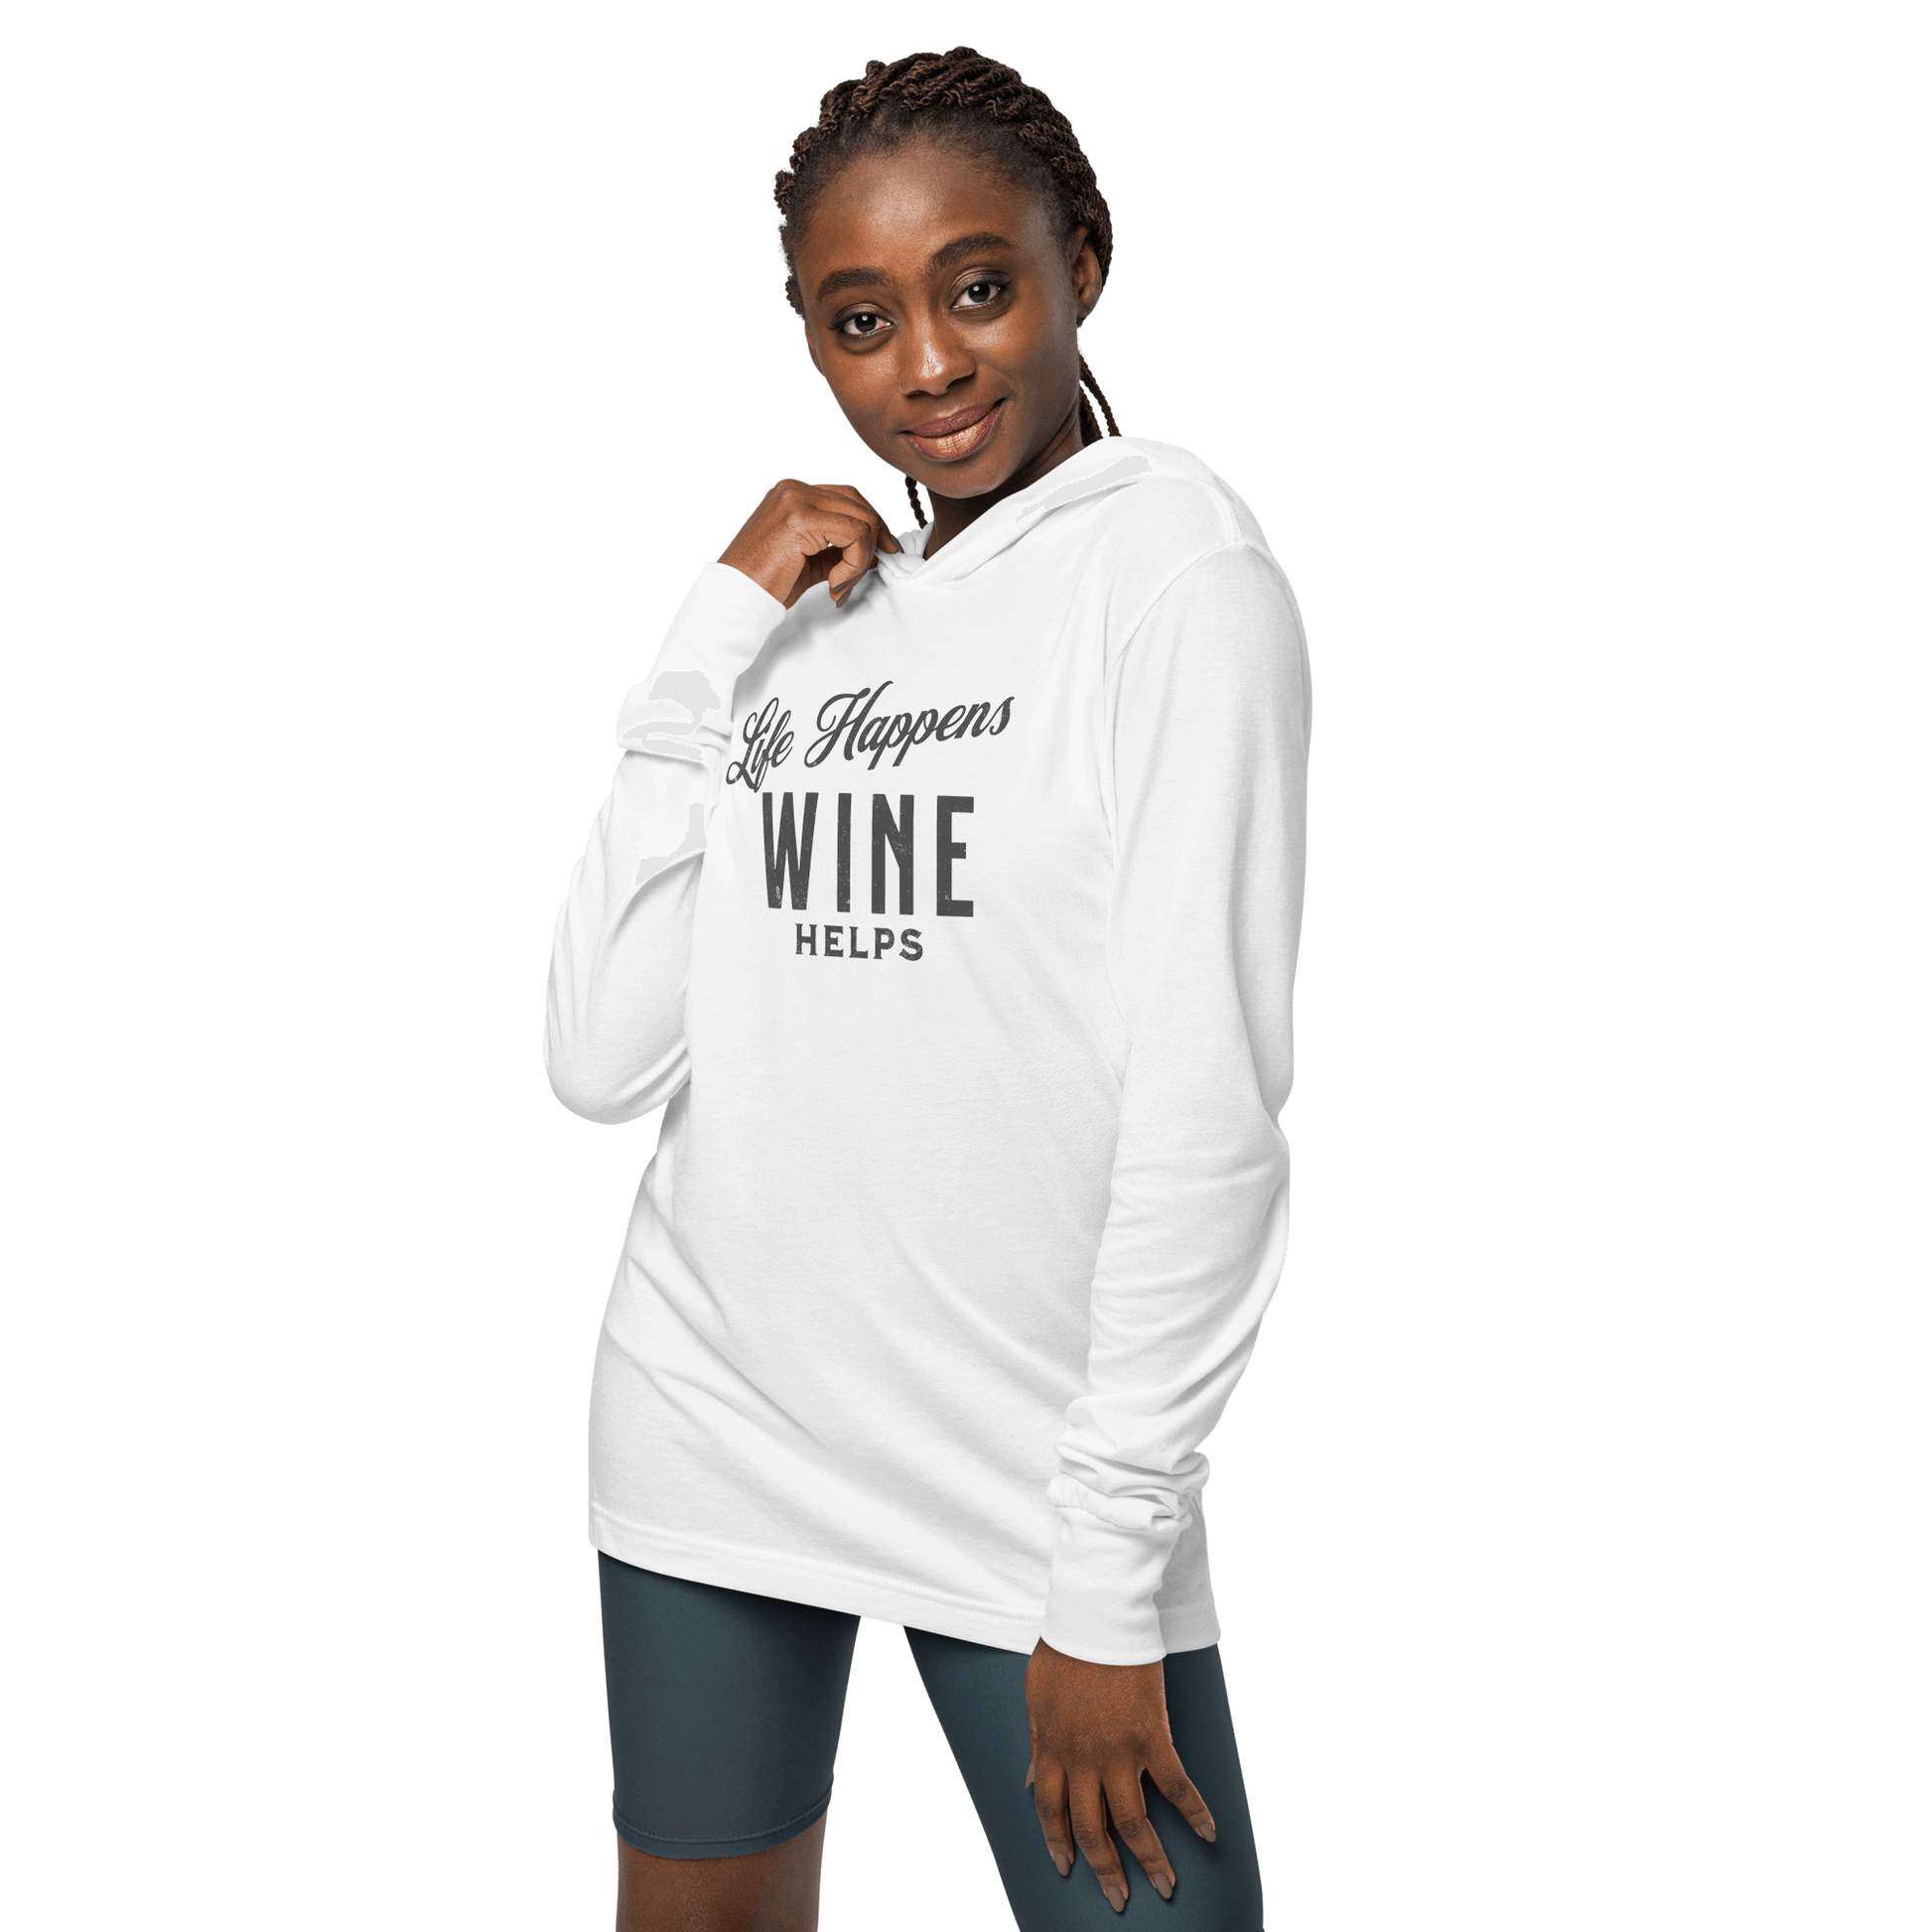 "Life Happens Wine Helps" Hoodie - Funny ApparelStay comfy with our lightweight hoodie. Perfect for layering, made from soft materials. Ideal funny apparel for everyday style.